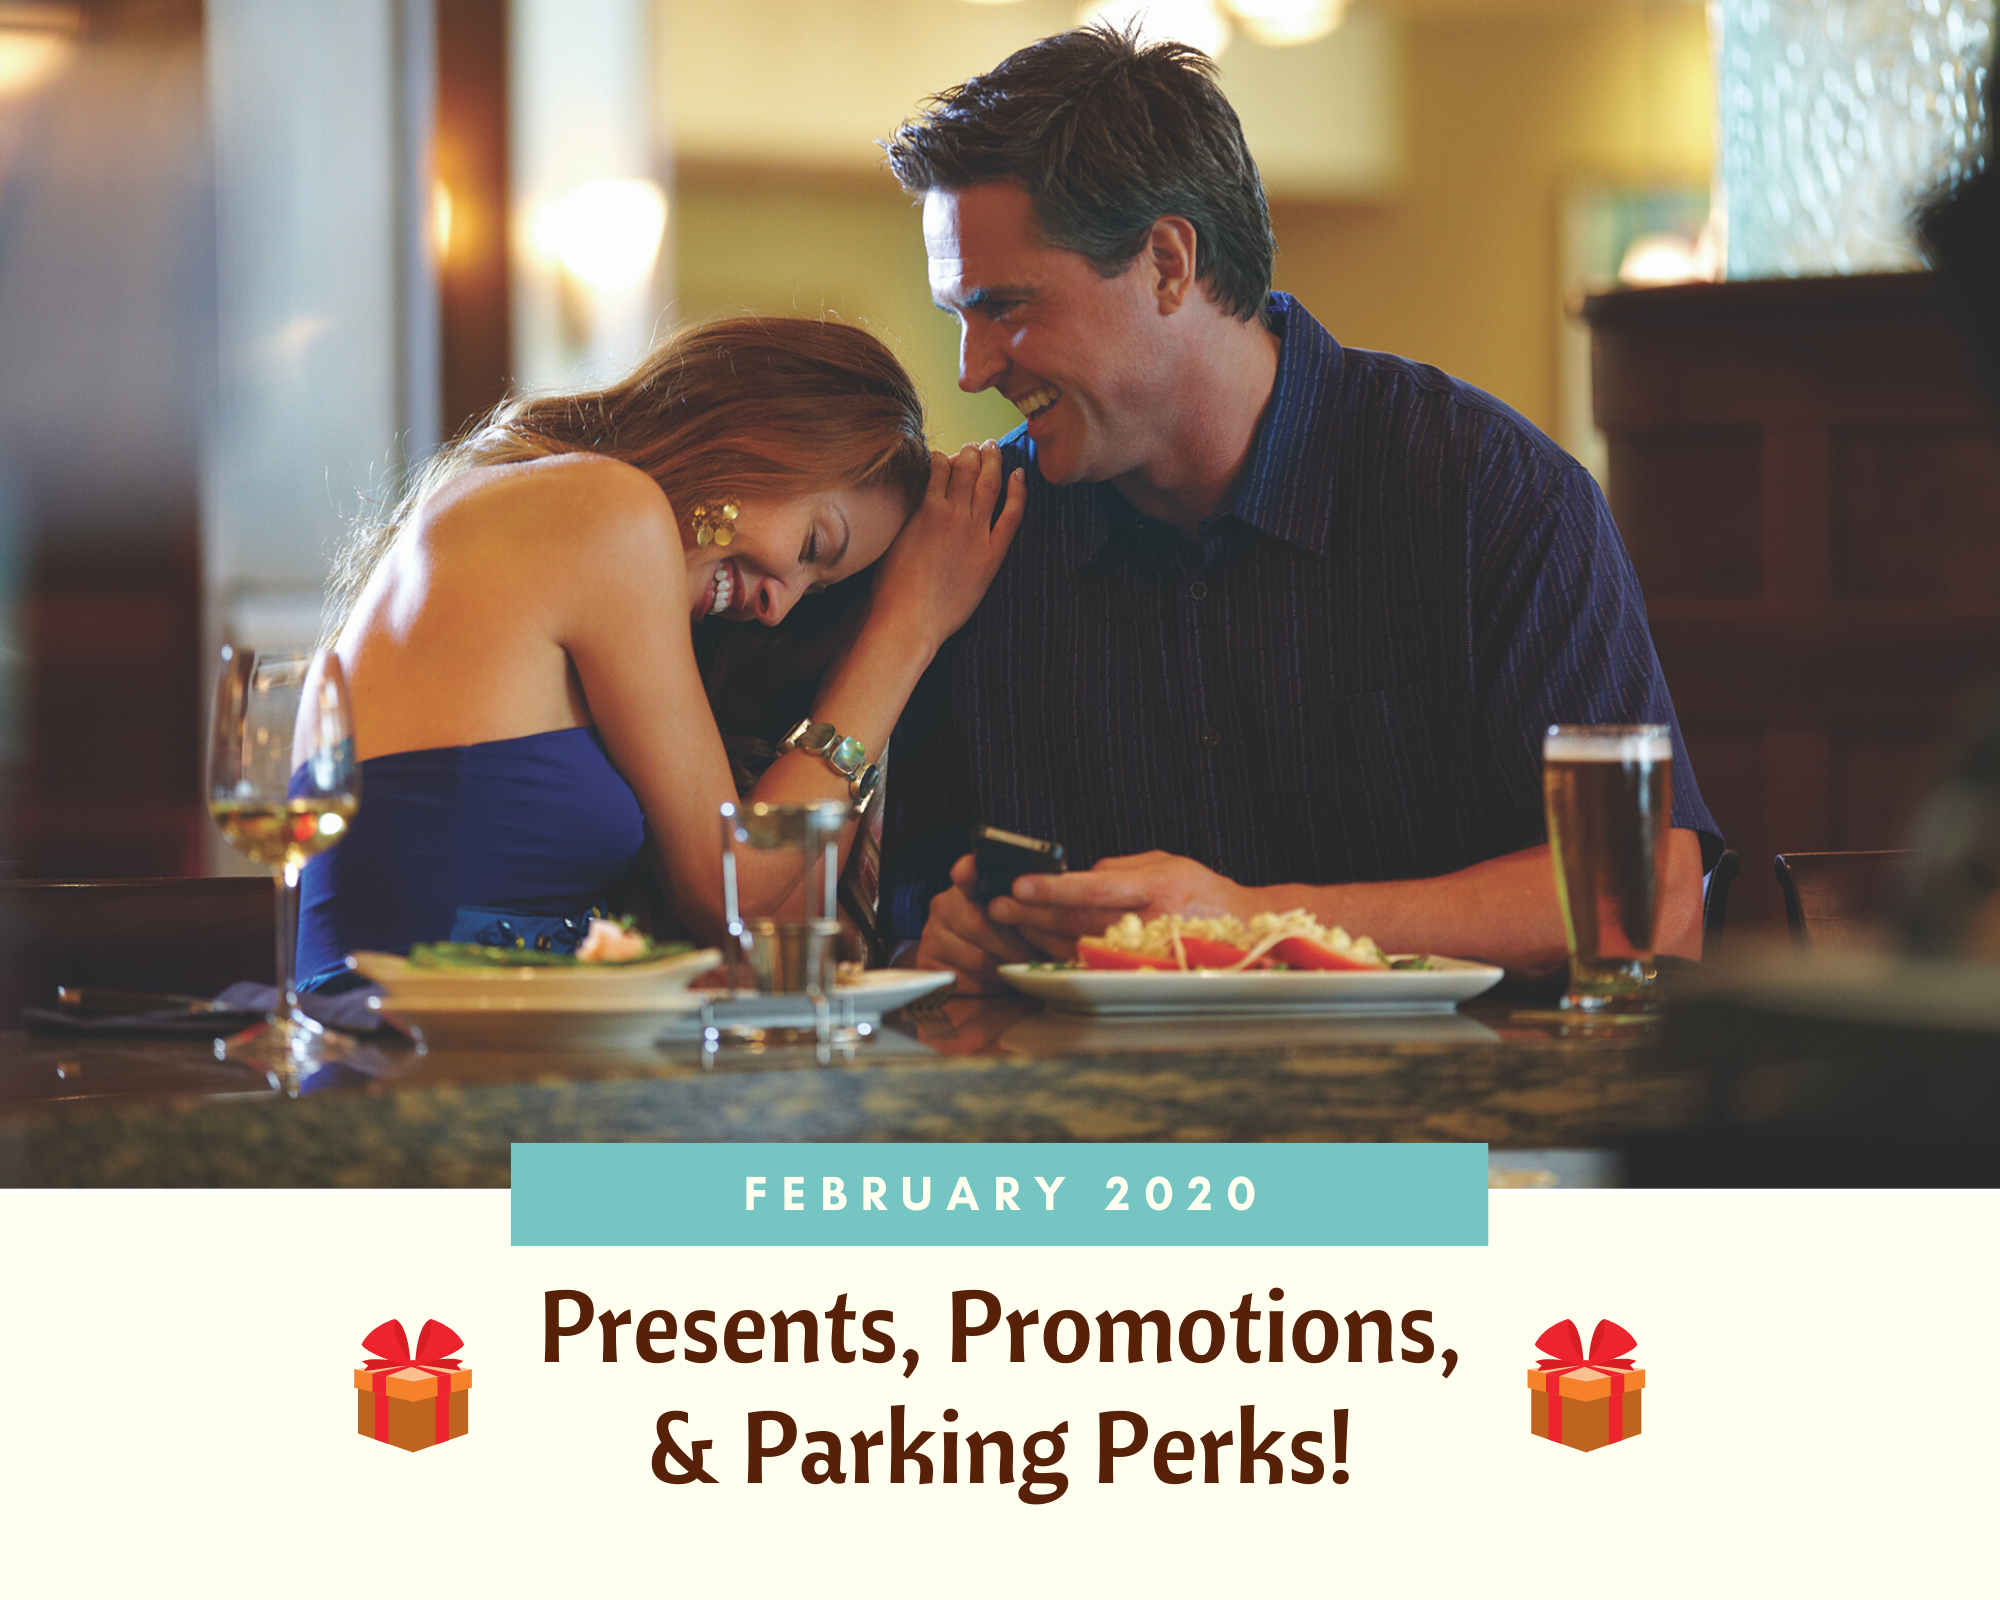 February 2020: Presents, Promotions, and Parking Perks!